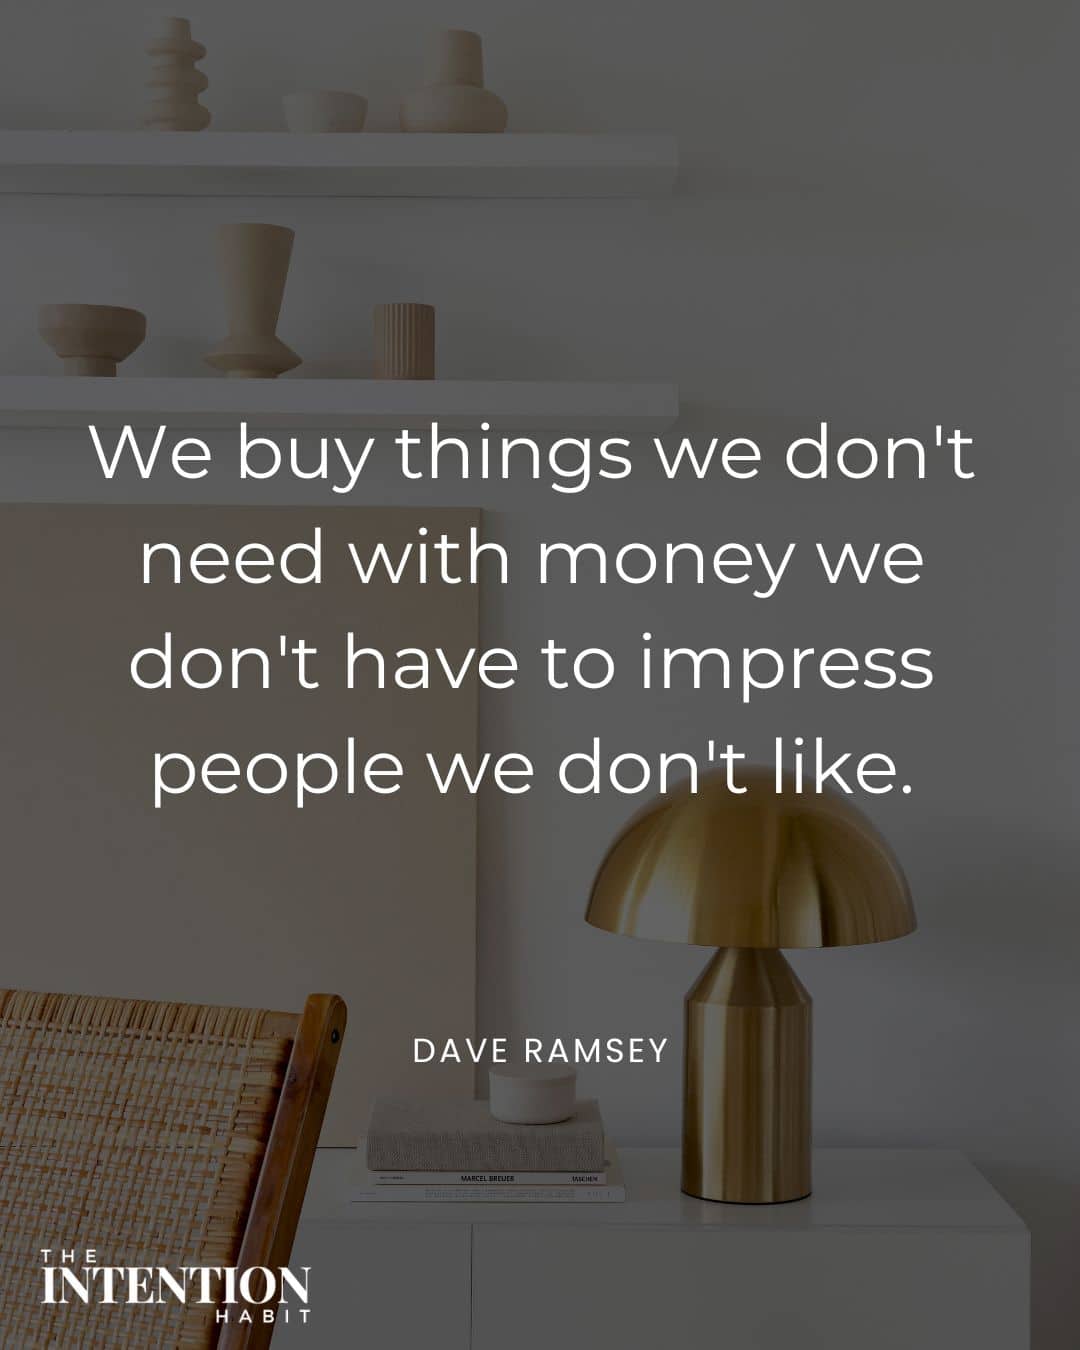 we buy things we don't need with money we don't have to impress people we don' tlike